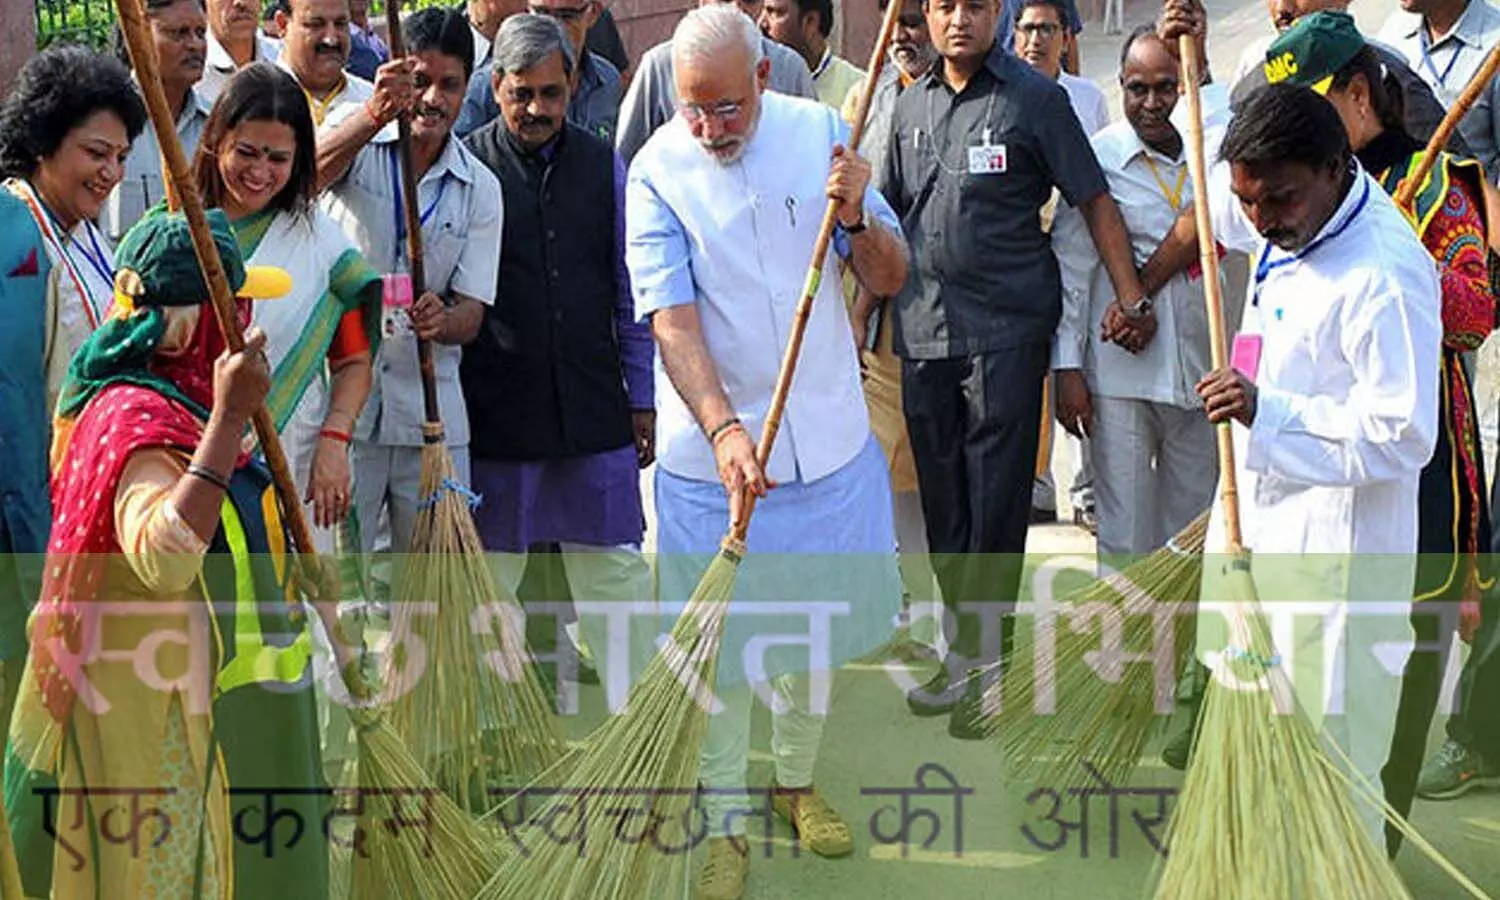 Swachh Bharat Abhiyan Guidelines: What do the guidelines of cleanliness campaign say